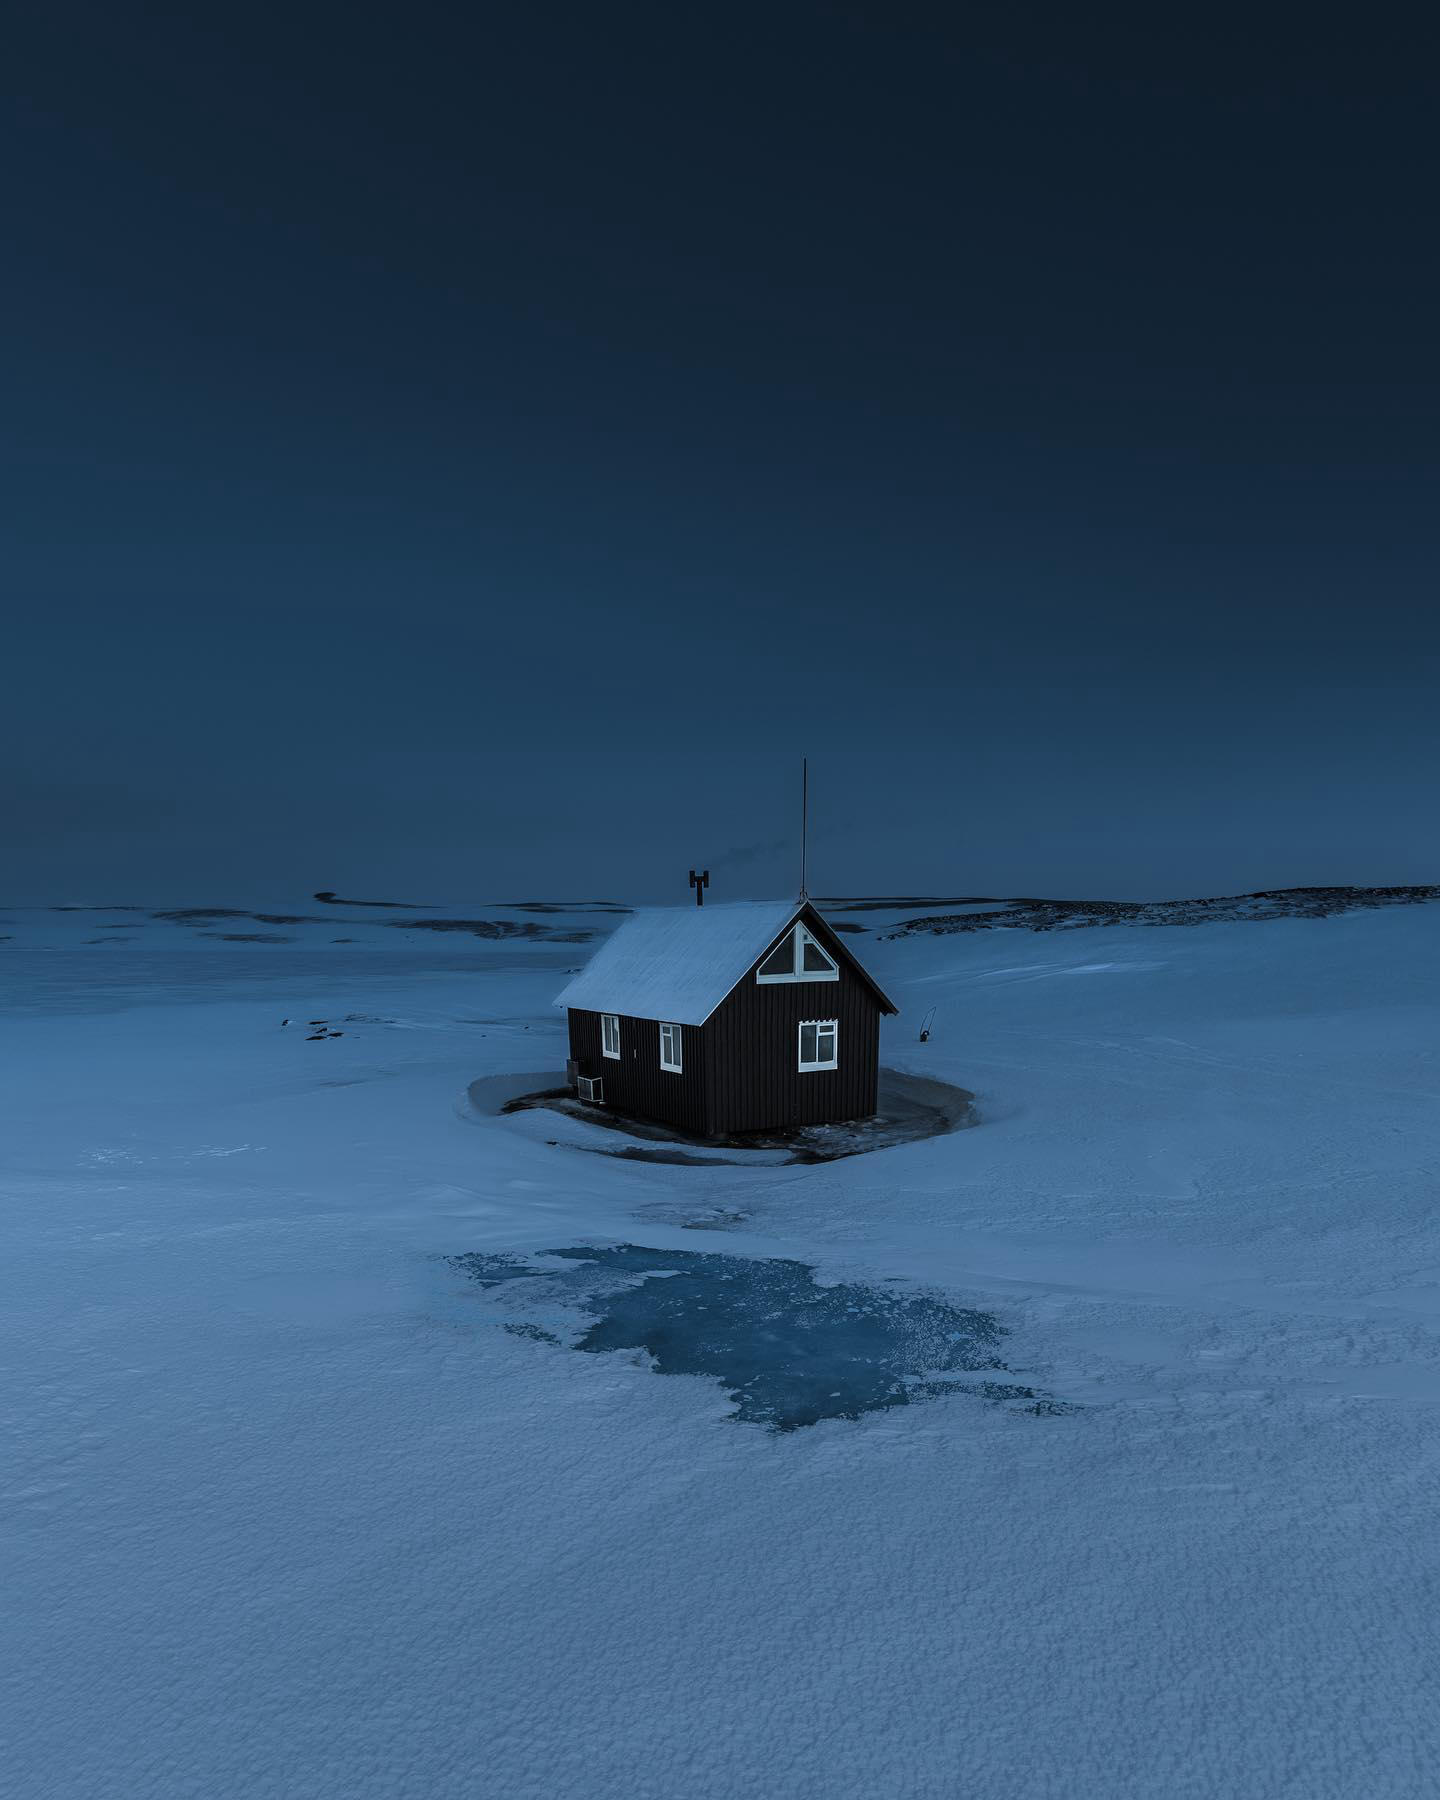 Winter nights in the Icelandic highlands